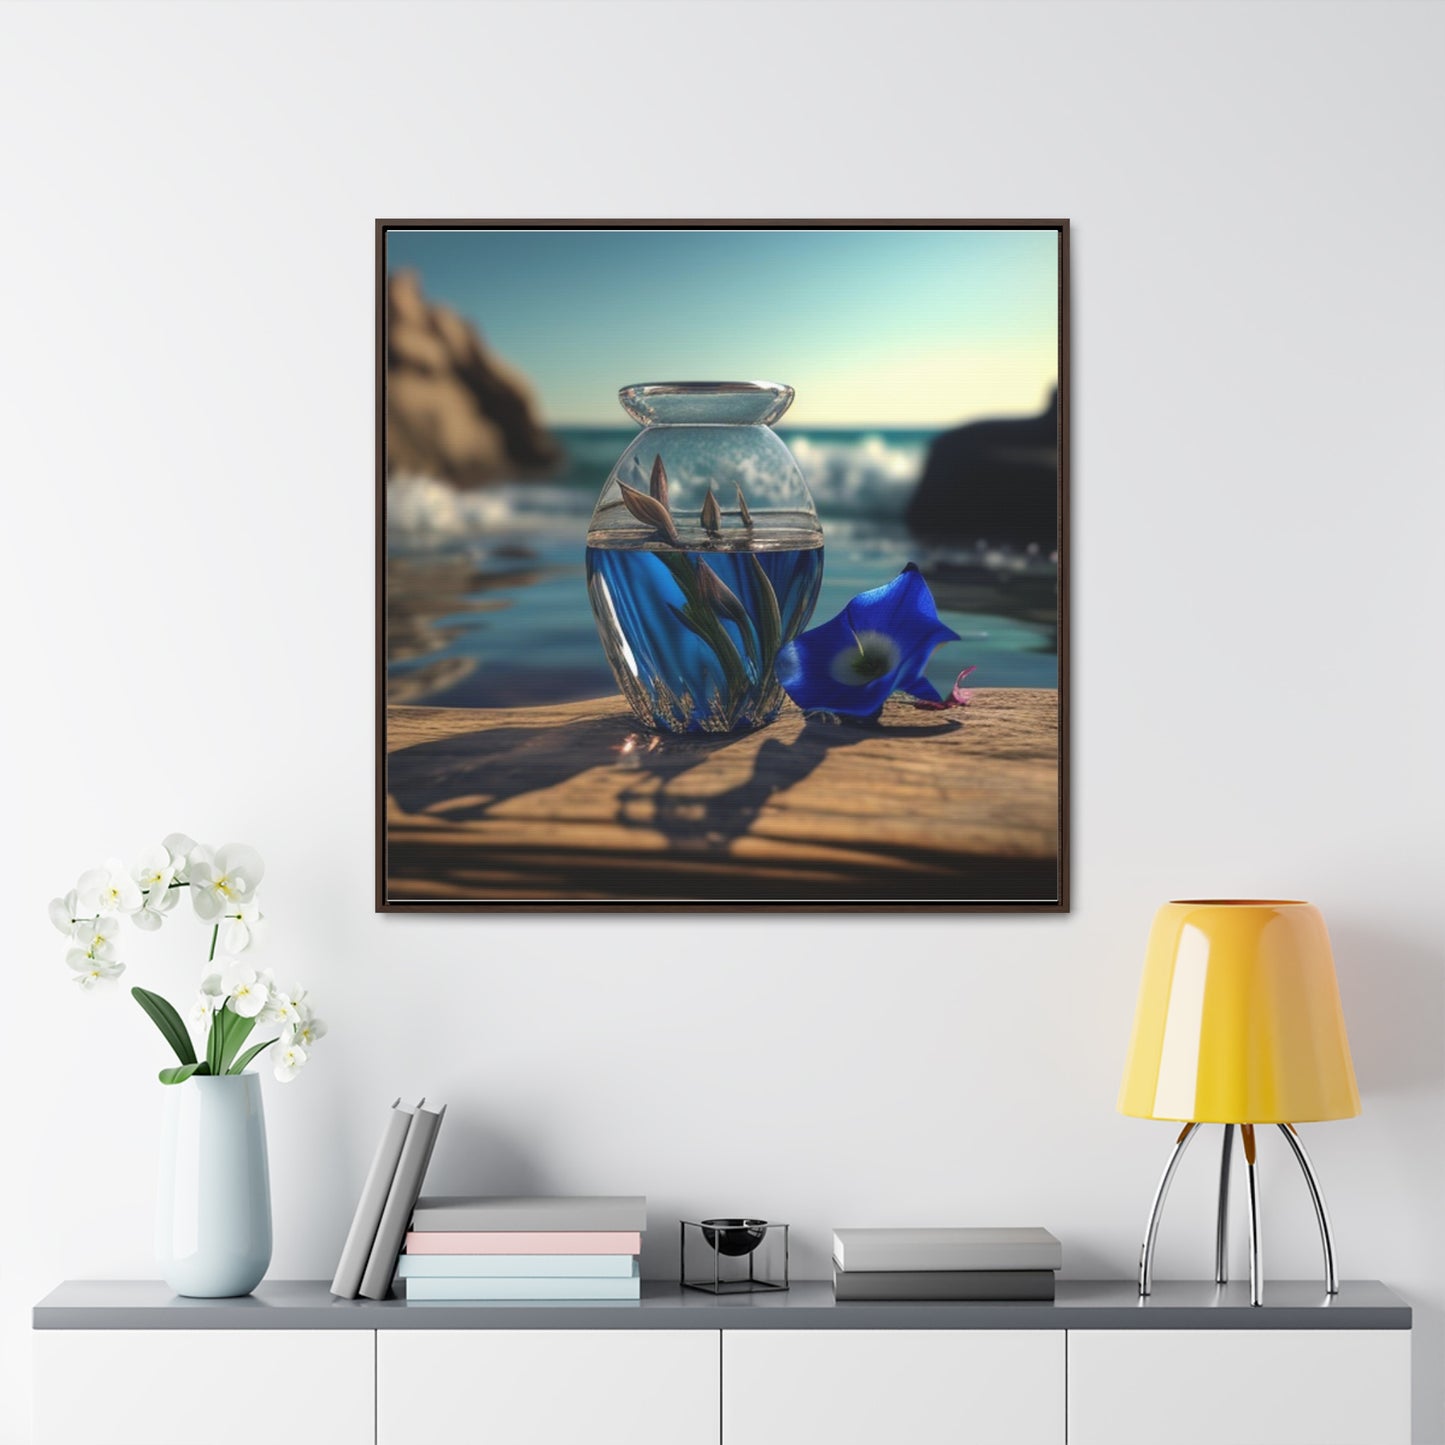 Gallery Canvas Wraps, Square Frame The Bluebell 4